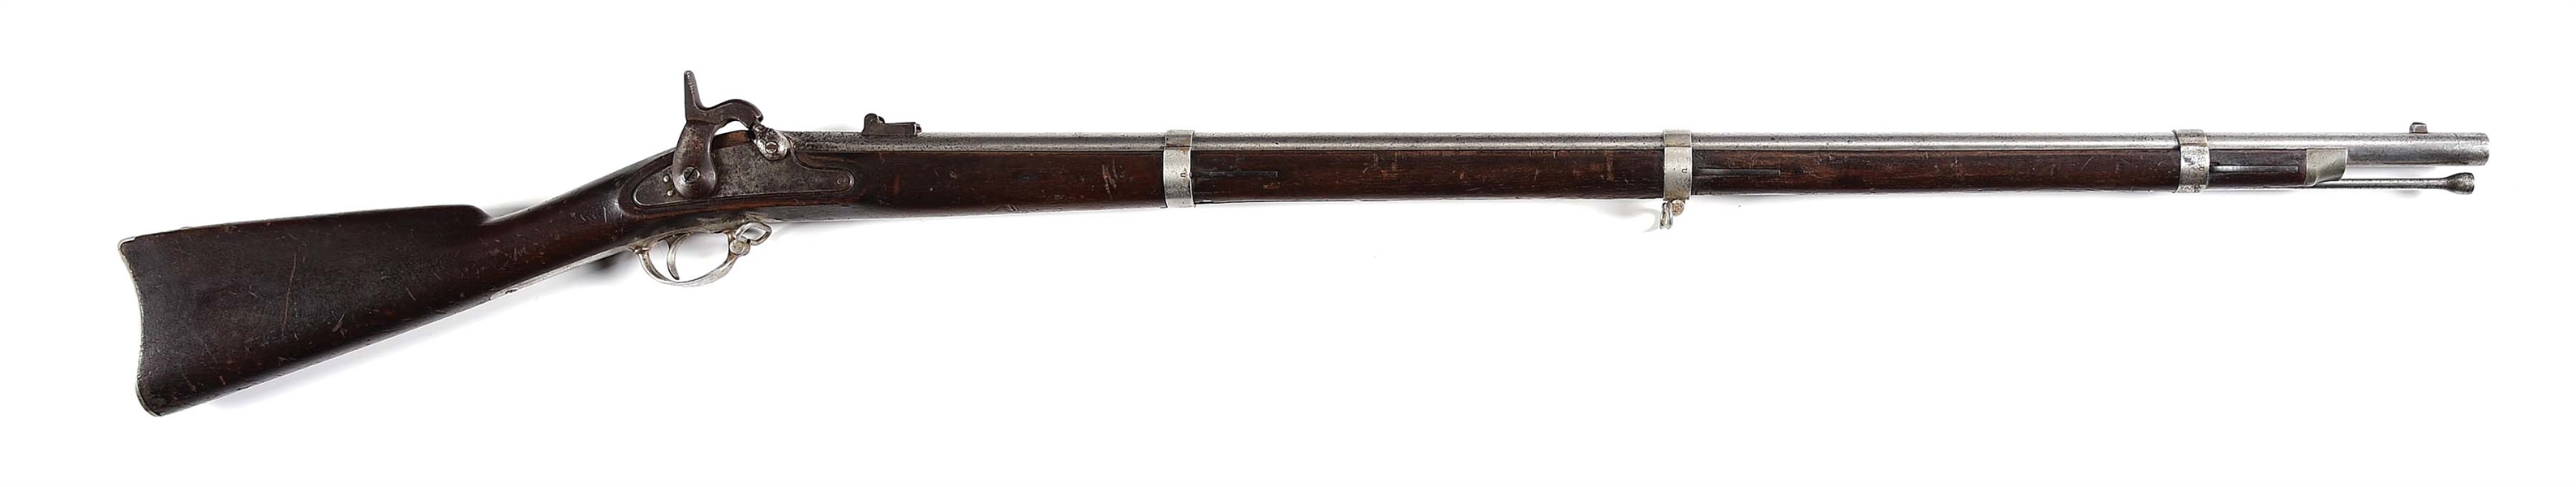 (A) CONNECTICUT CONTRACT WHITNEY M1861 PERCUSSION MUSKET.